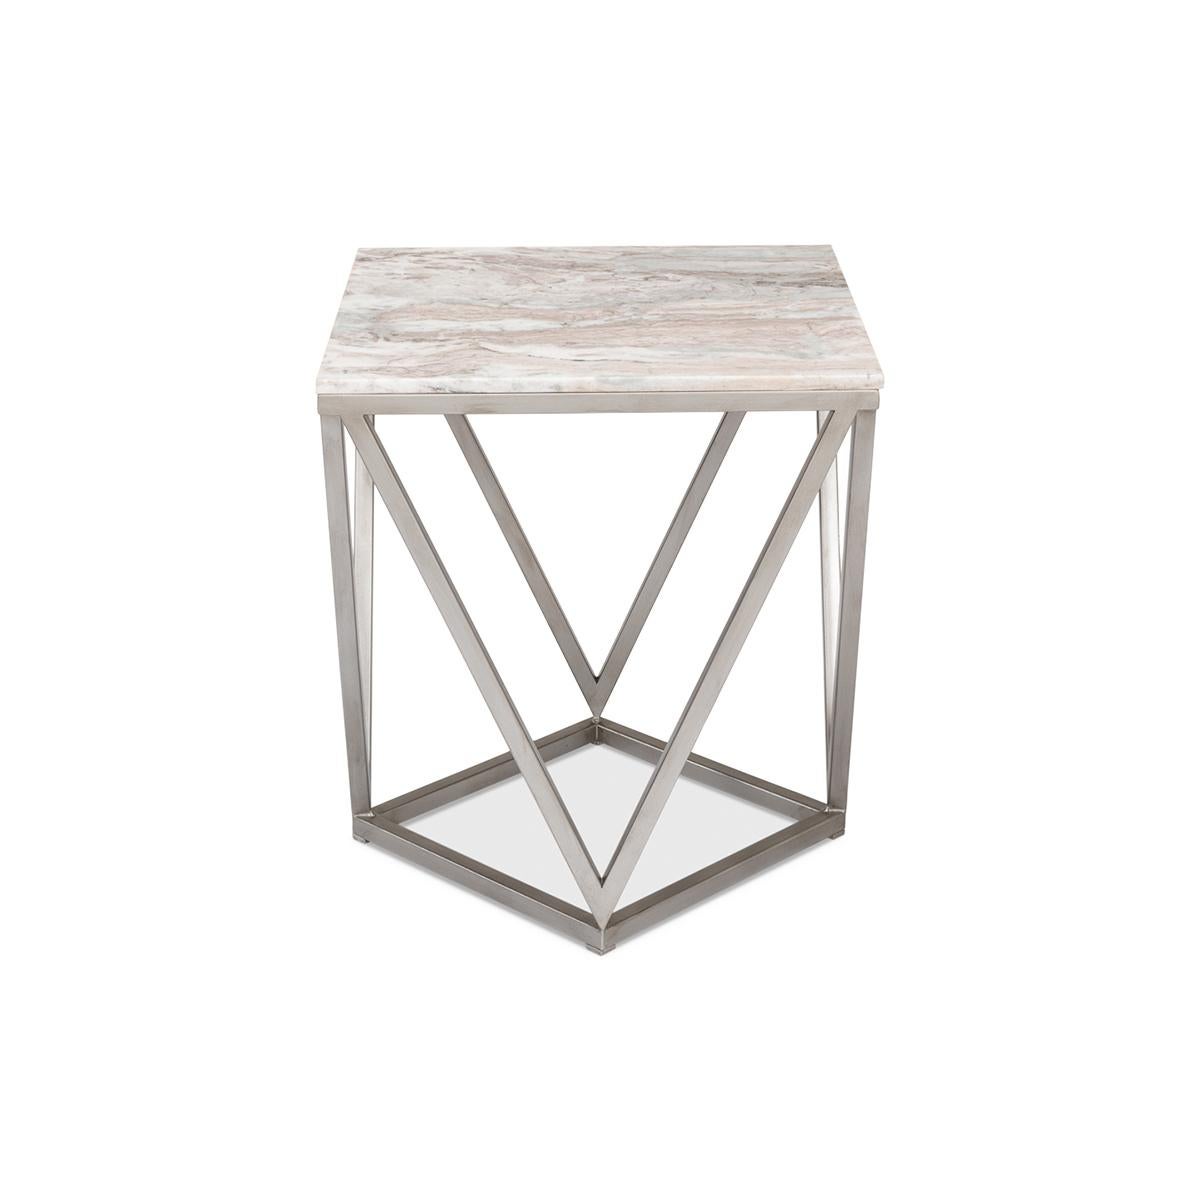 An unusual geometrically inspired silvered iron base with a square marble top.

Dimensions: 20